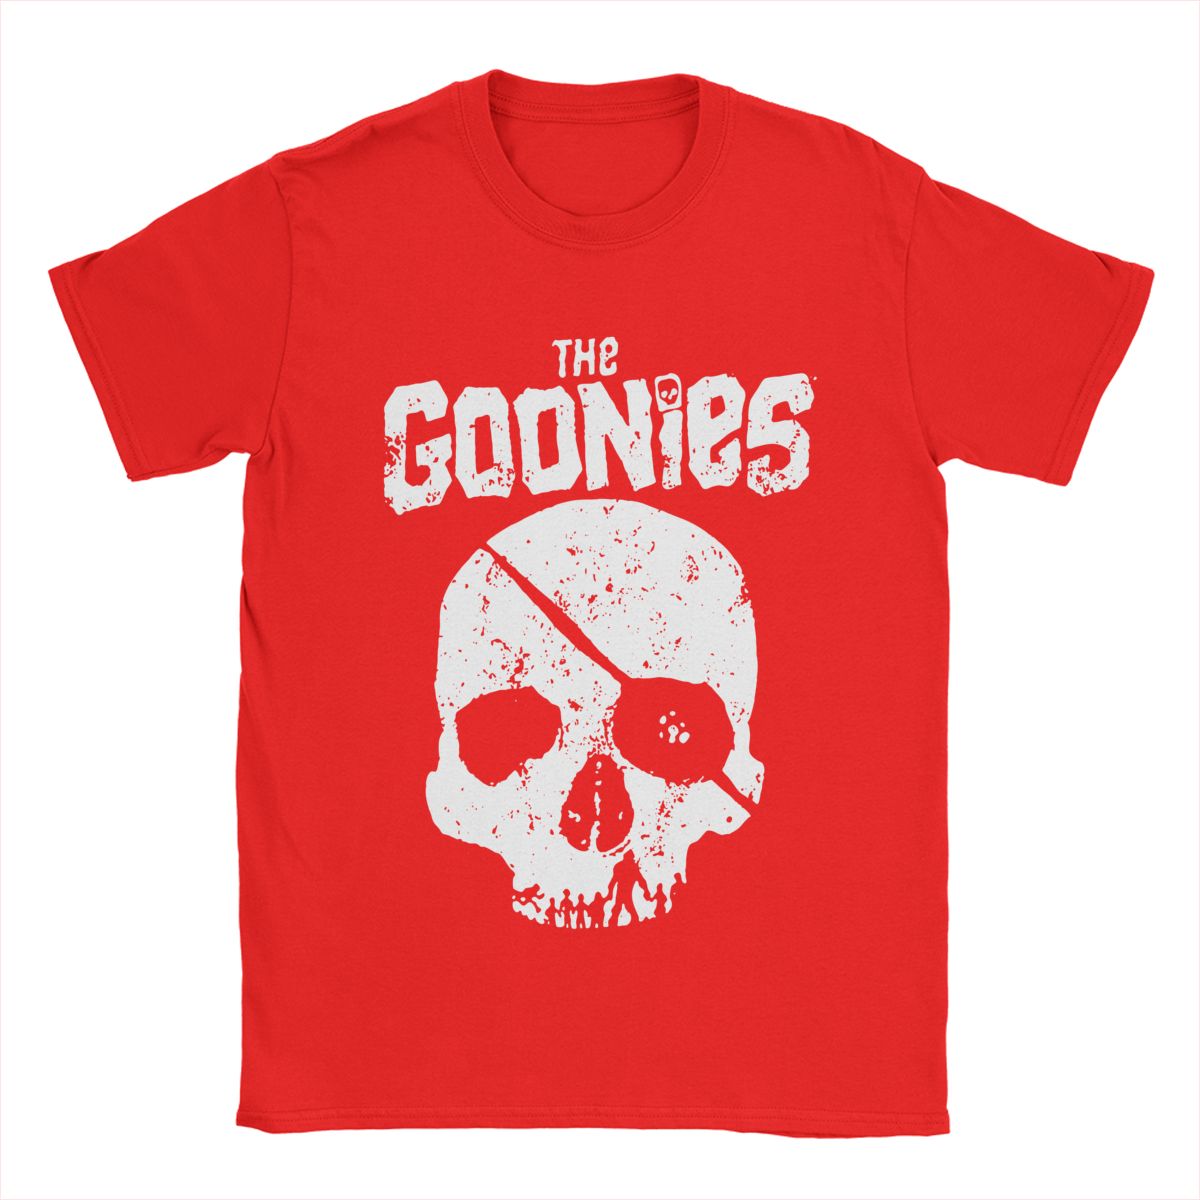 The Goonies - Classic 80s - Cult Childrens Movie - Vintage Film Lover T-Shirt-Red-S-